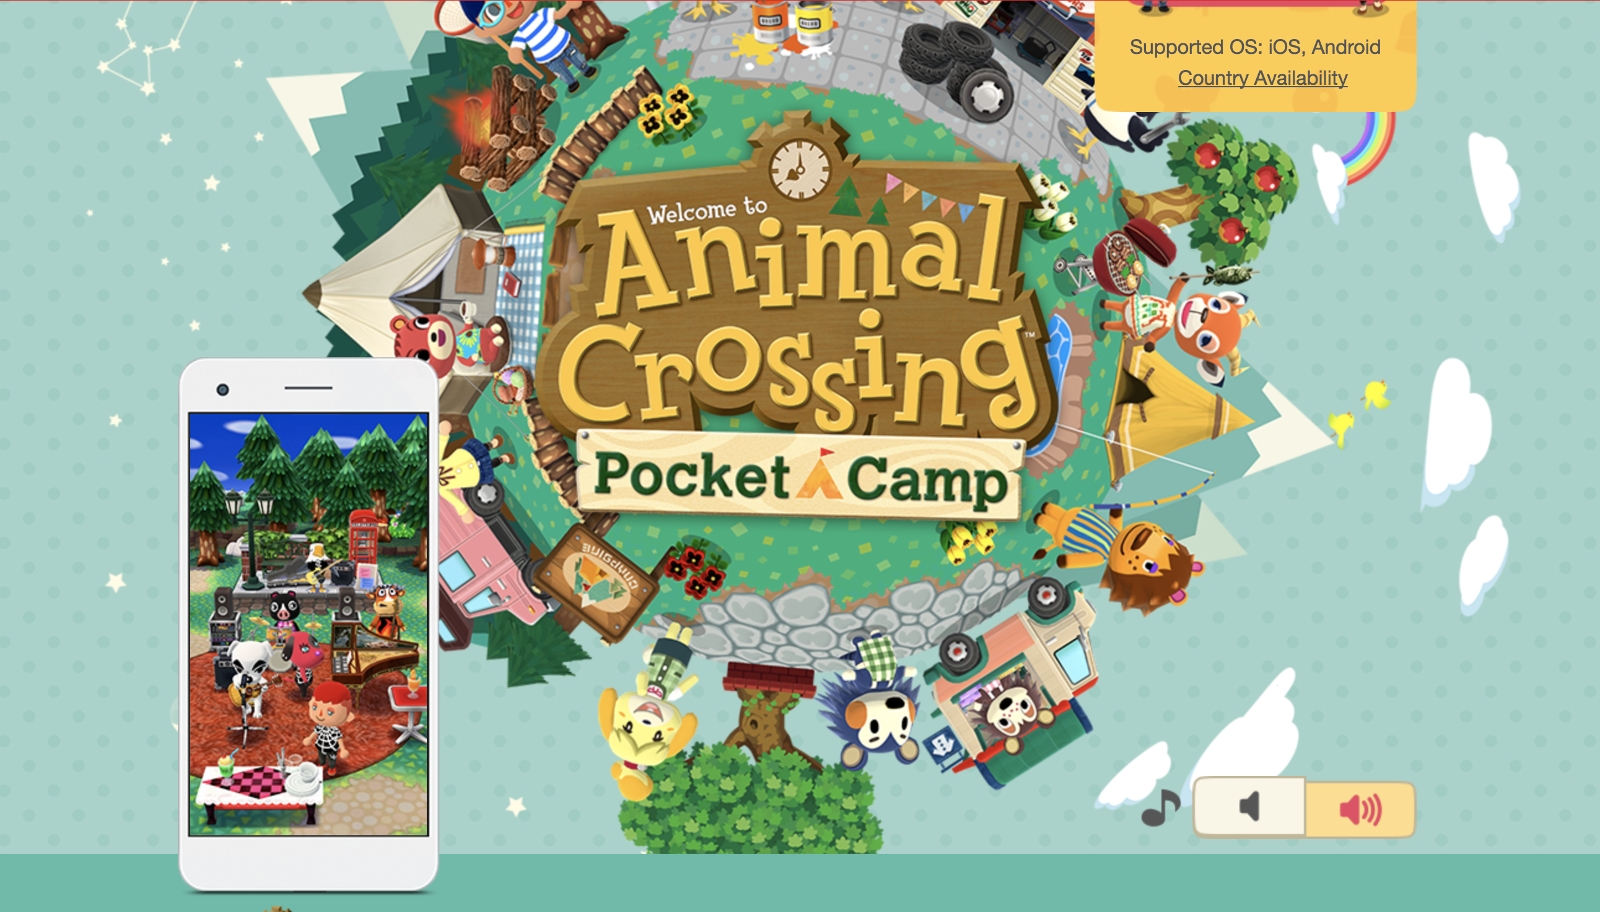 'Animal Crossing: Pocket Camp' towns open on smartphones in November | DeviceDaily.com